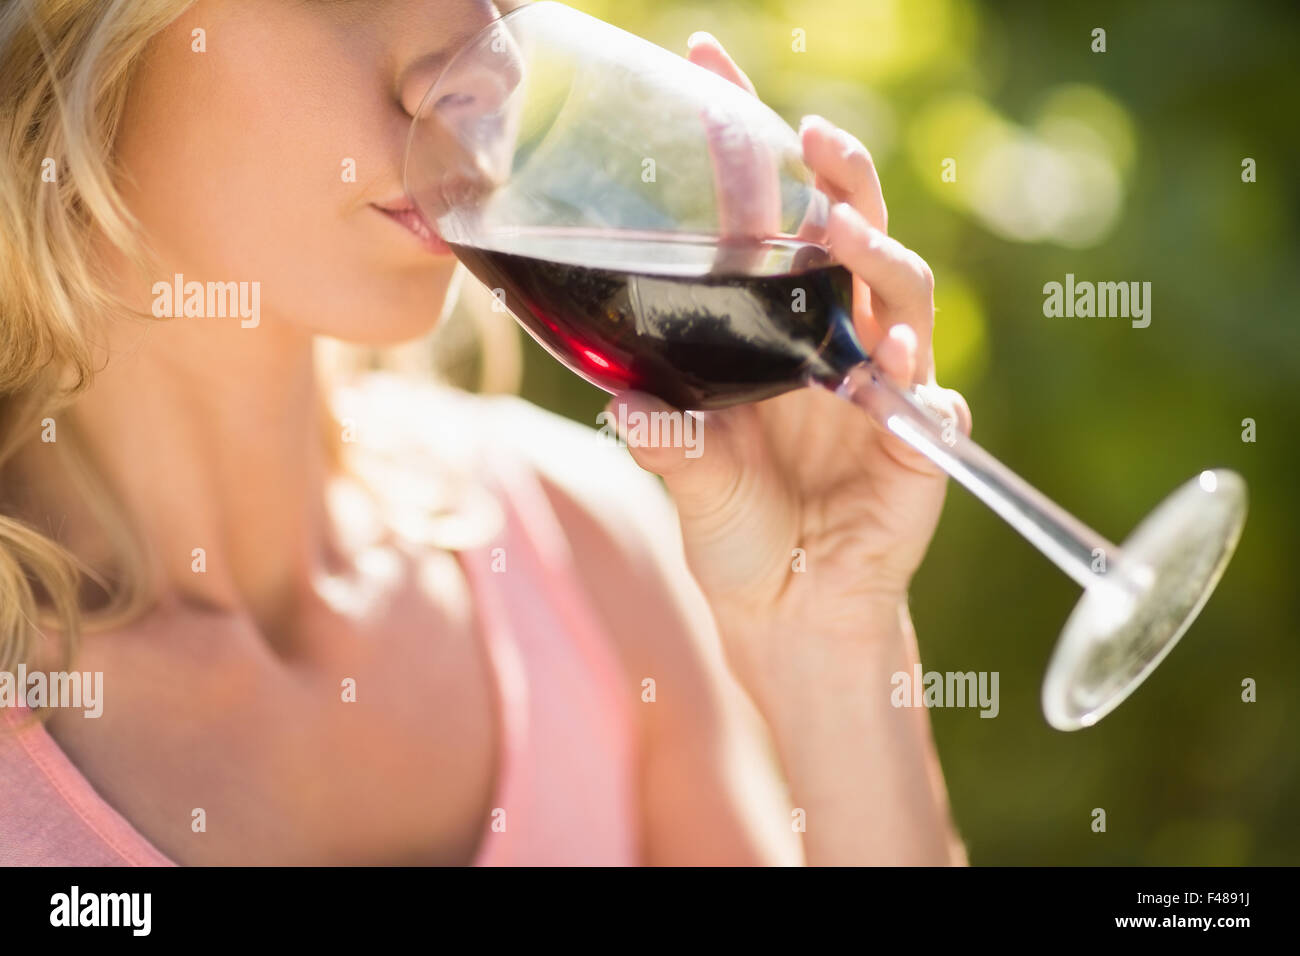 Close up view of blonde woman drinking red wine Stock Photo